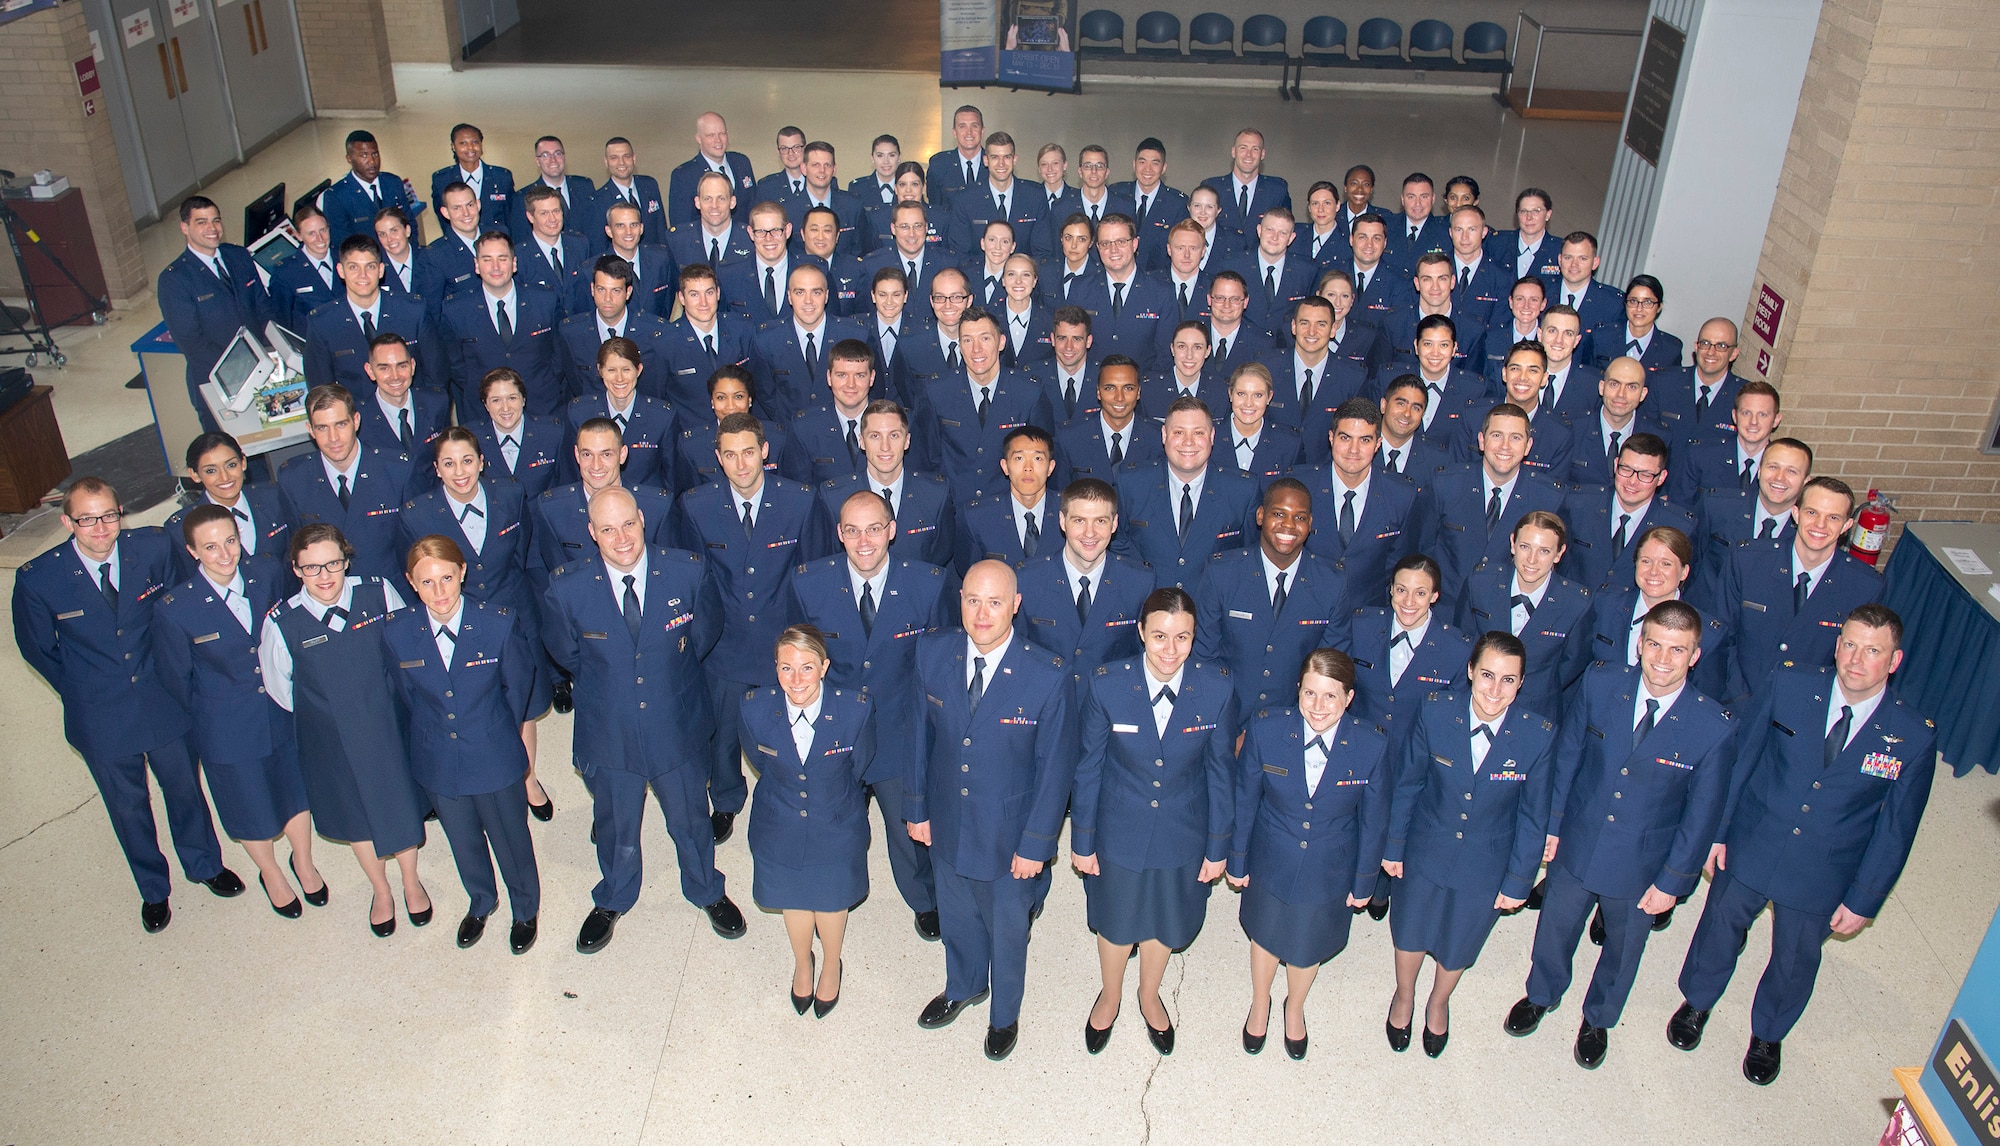 The 88th Medical Group recognized approximately 100 medical personal for completing their residency programs during a graduation ceremony May 23, 2019, at the National Museum of the U.S. Air Force. Lt. Gen. Dorothy A. Hogg, Air Force surgeon general, gave the graduation address. (U.S. Air Force photo by R.J. Oriez)